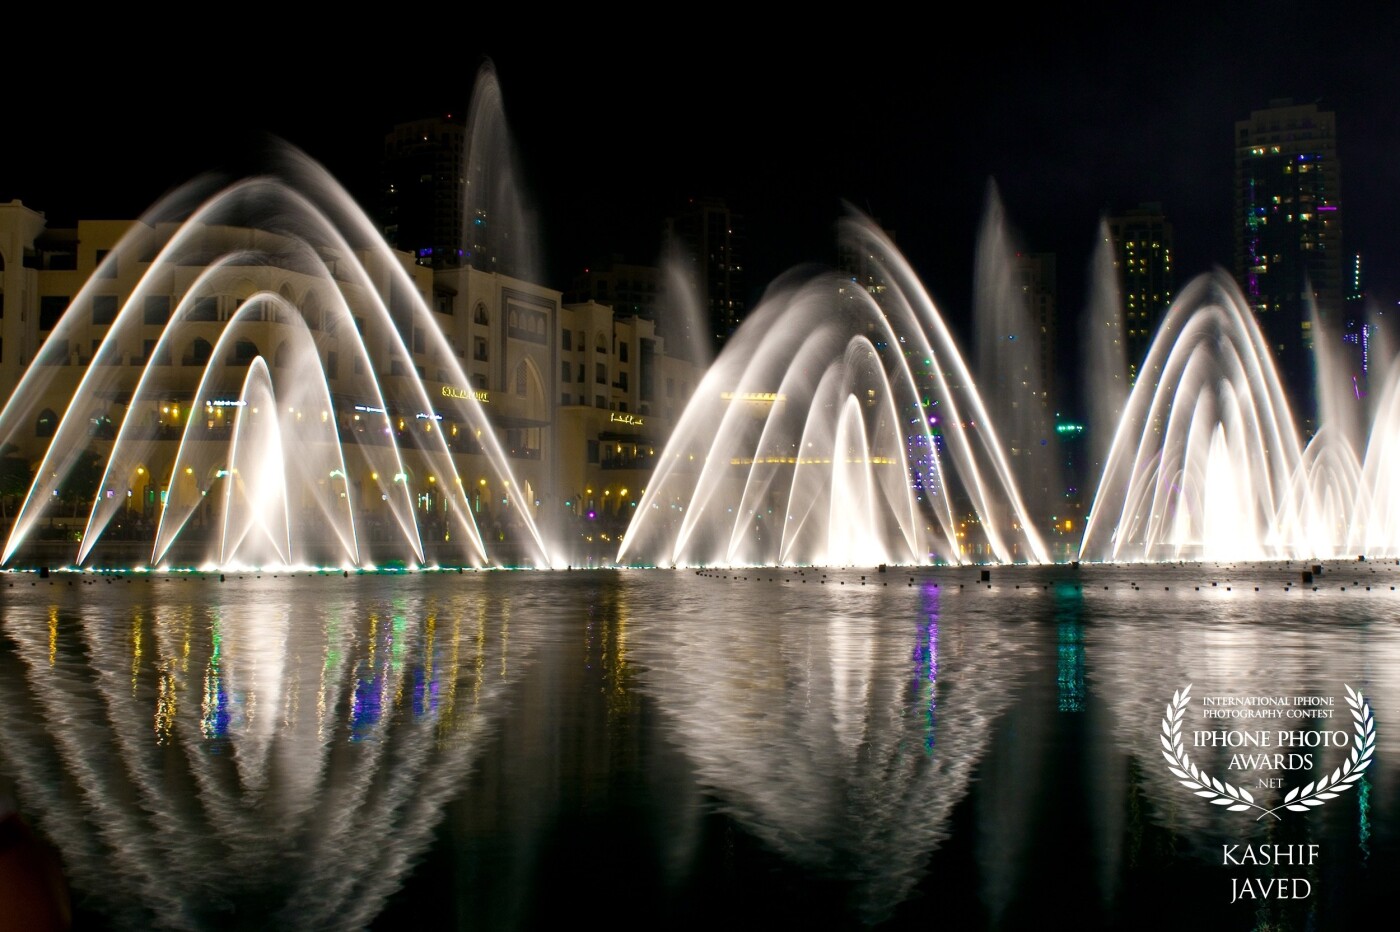 I took this photo during my stay in Dubai – UAE, a famous and popular fountain spectacle at Dubai Mall. The water dance along with its reflection is quite an amazing display. ‘Be a fountain, not a drain’. – Rex Hudler.